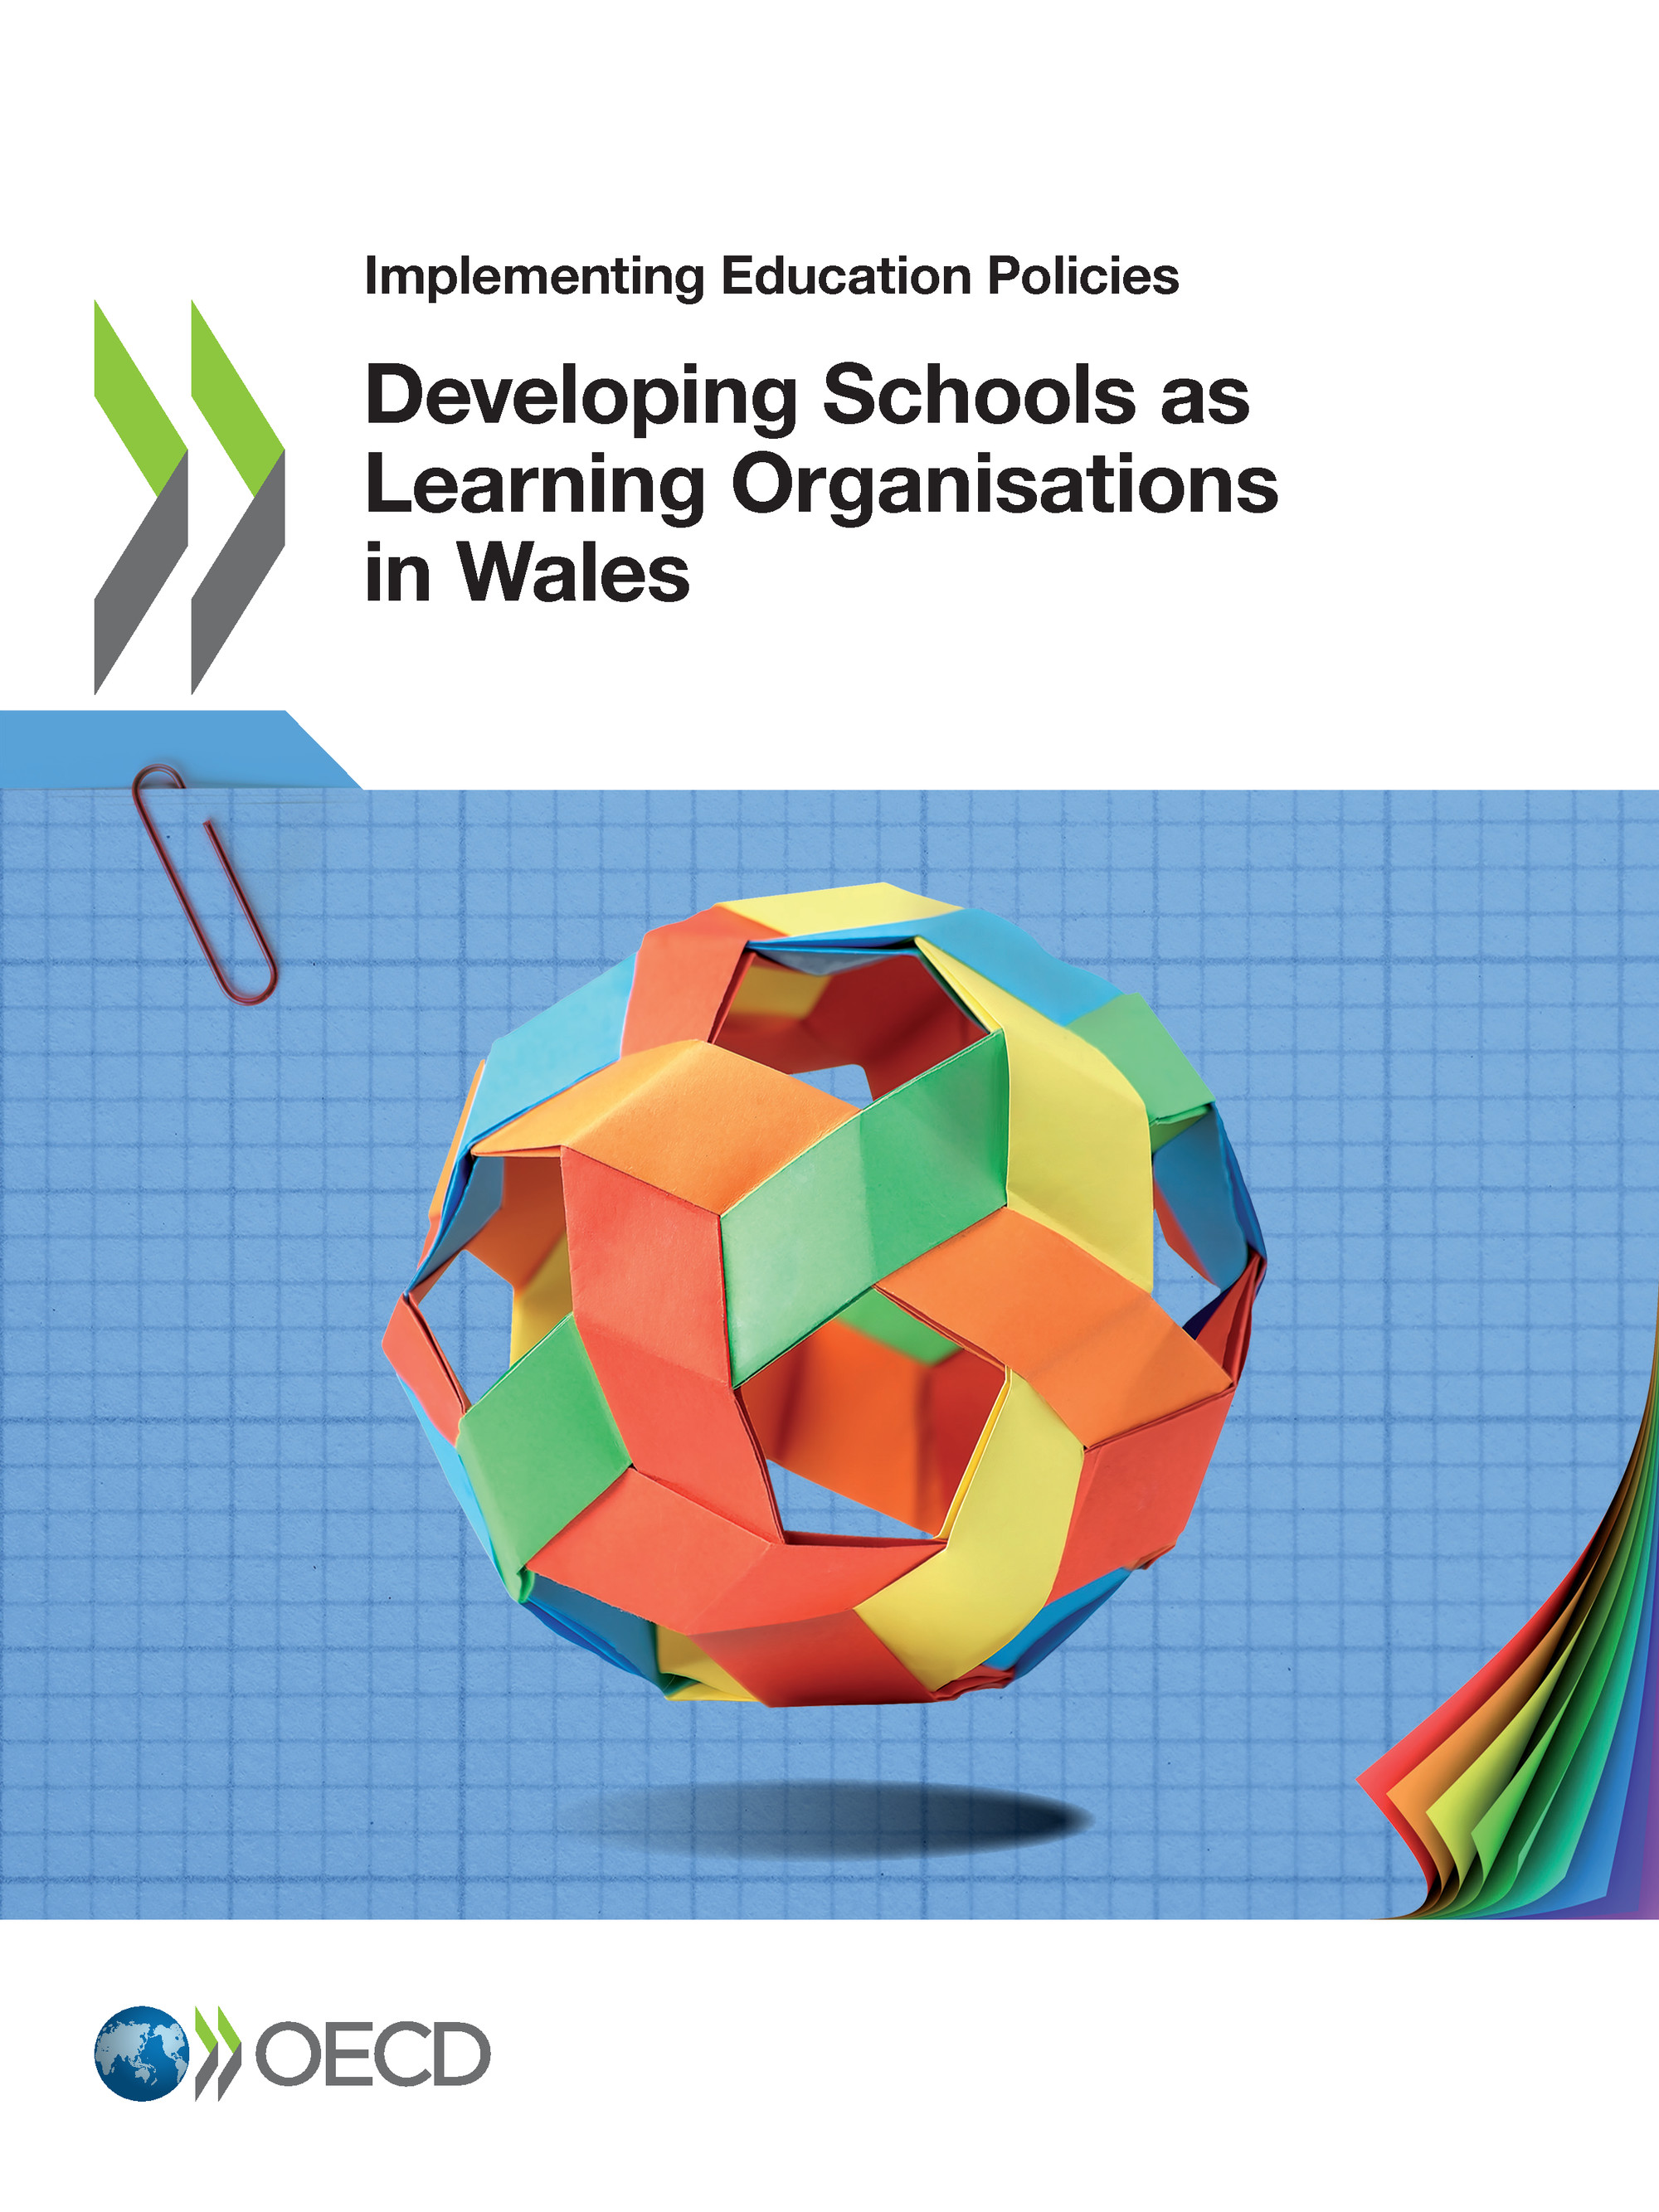 Developing Schools as Learning Organisations in Wales -  Collectif - OCDE / OECD